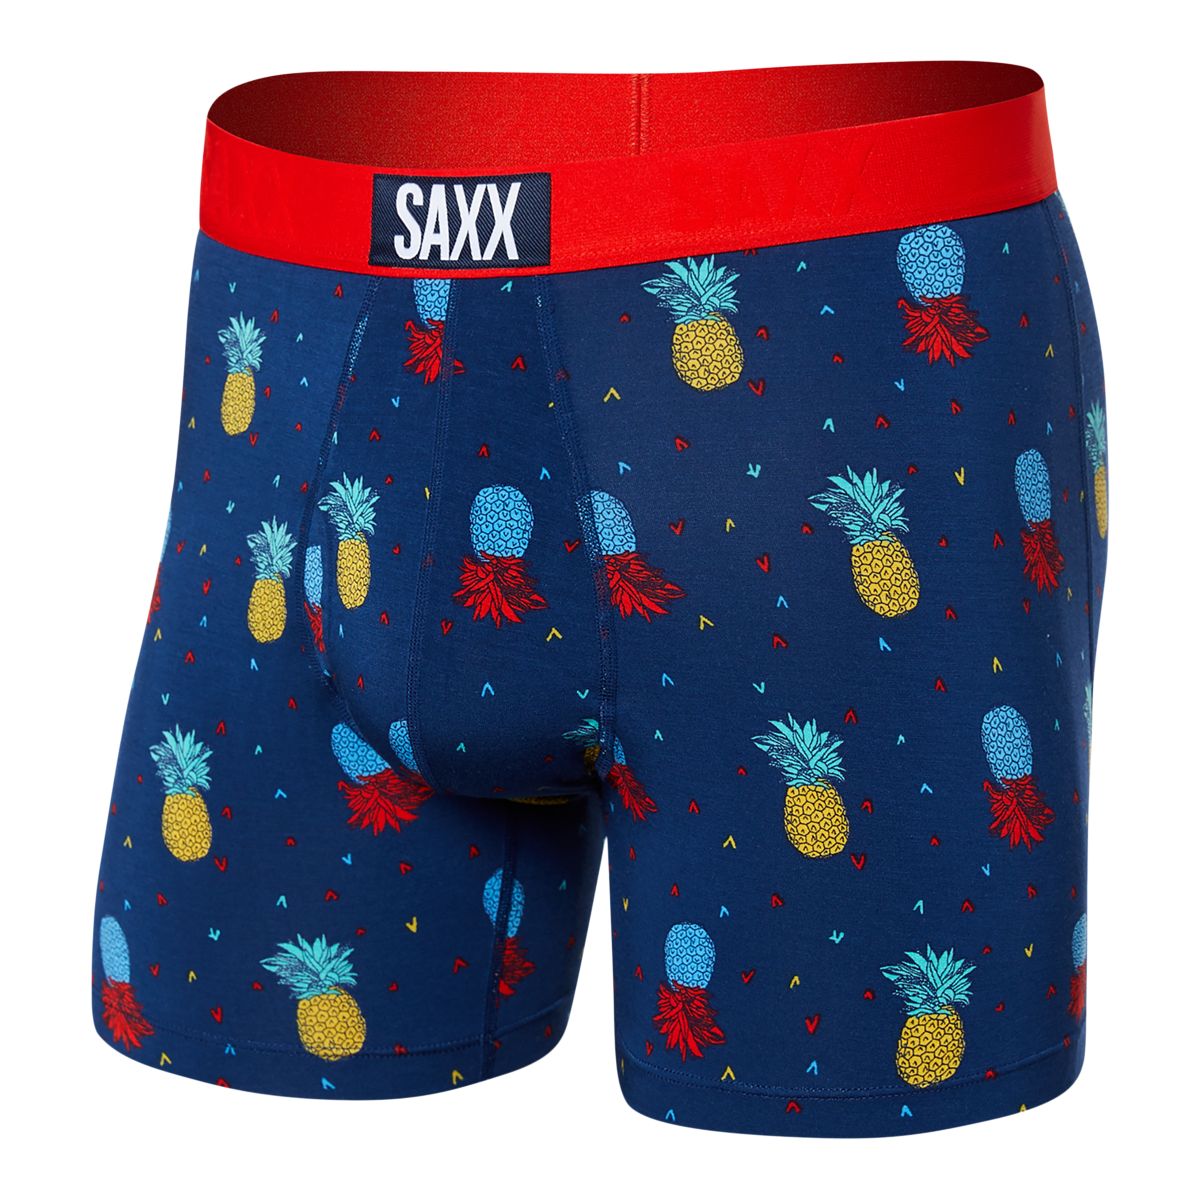 SAXX Ultra Men's Boxer Brief with Fly, Underwear, Breathable